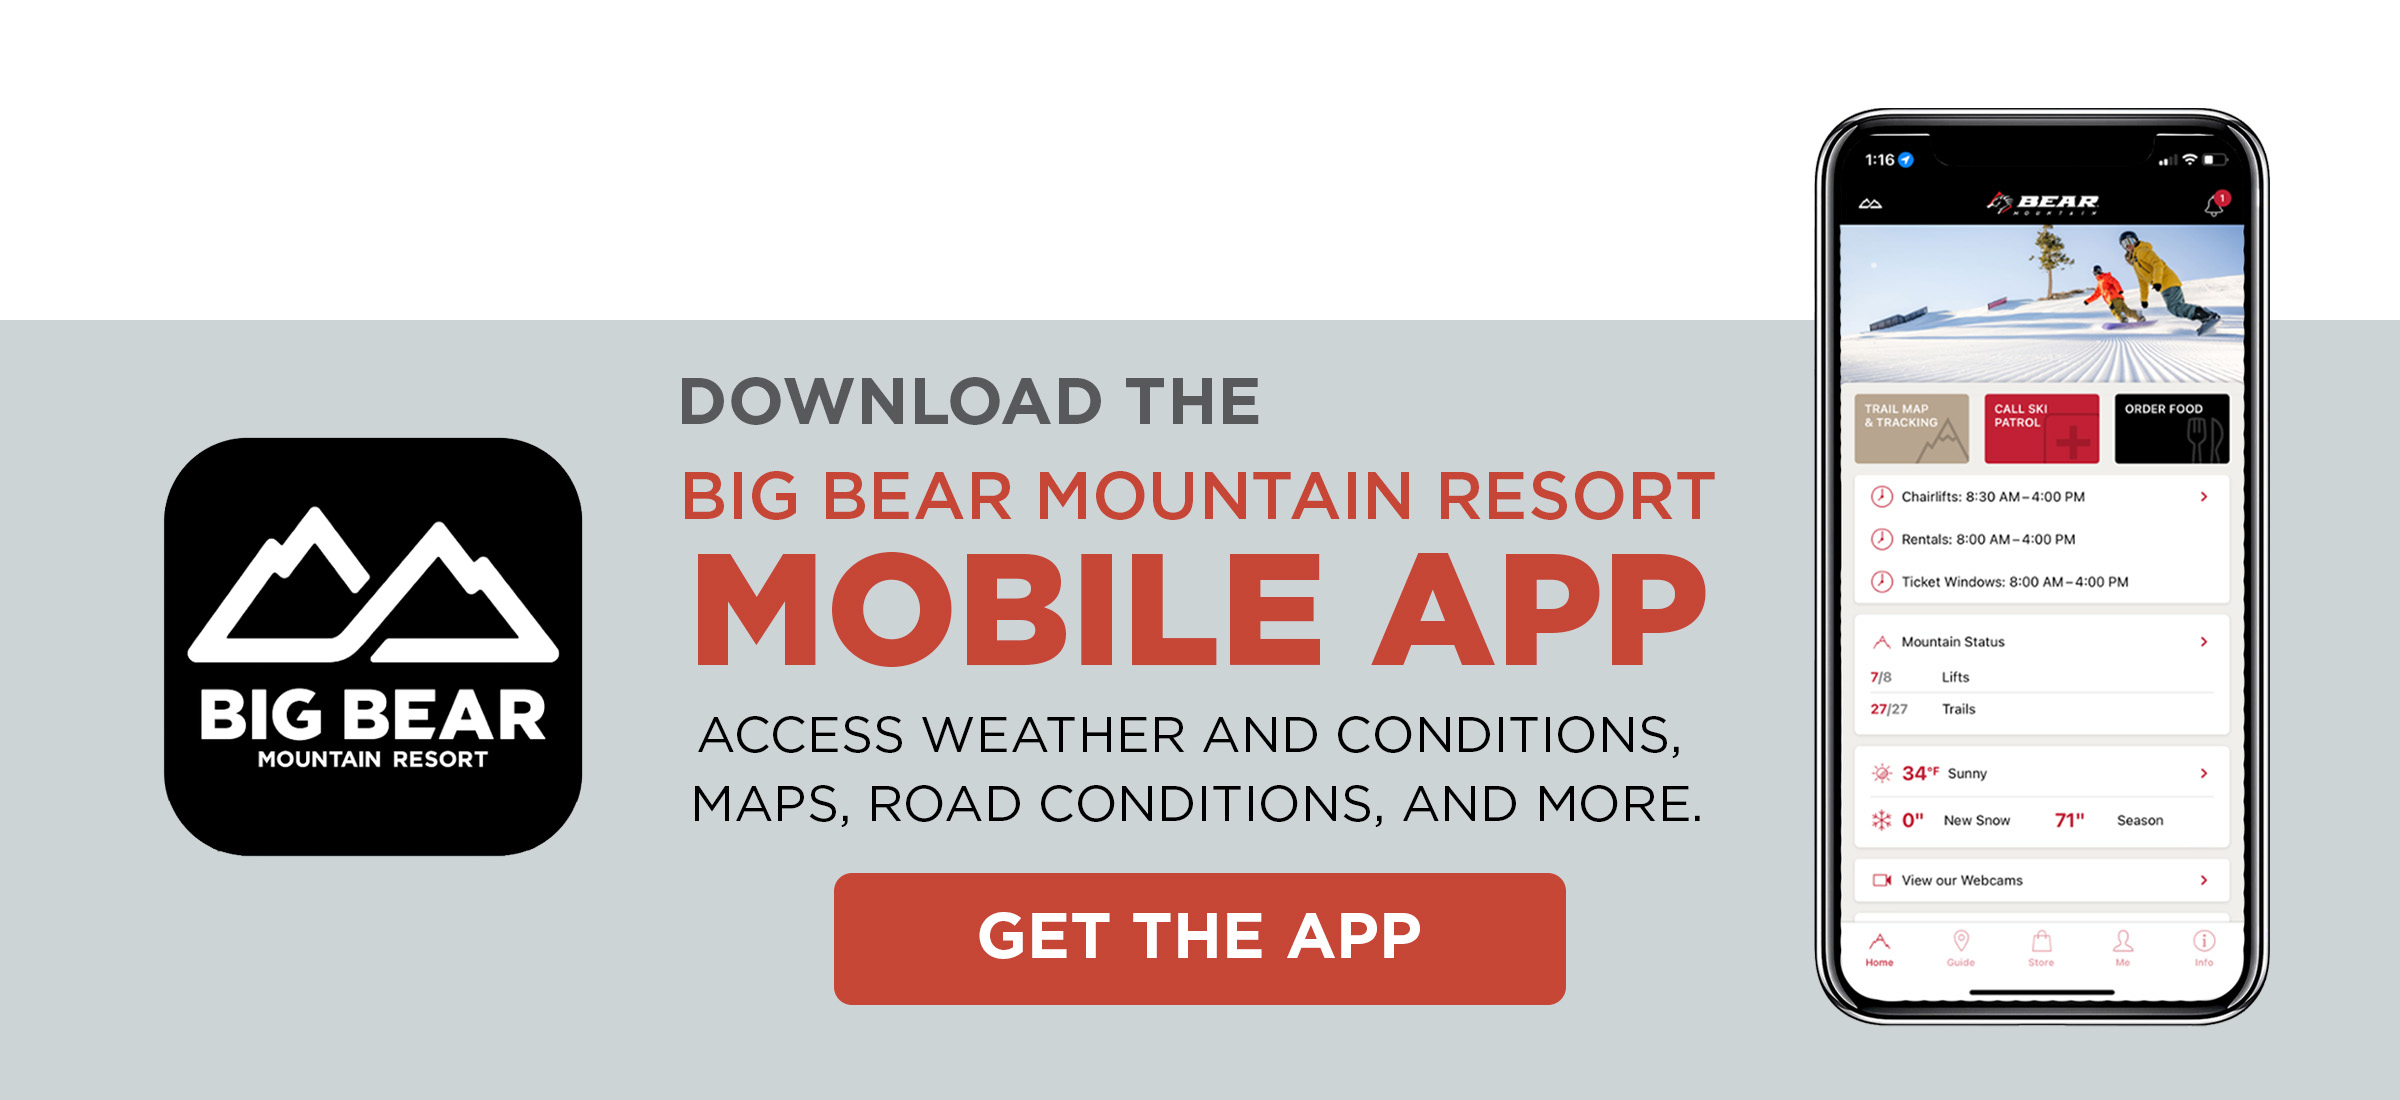 DOWNLOAD THE Big Bear Mountain Resort Mobile App Access weather and conditions, maps, road conditions, and more. GET THE APP